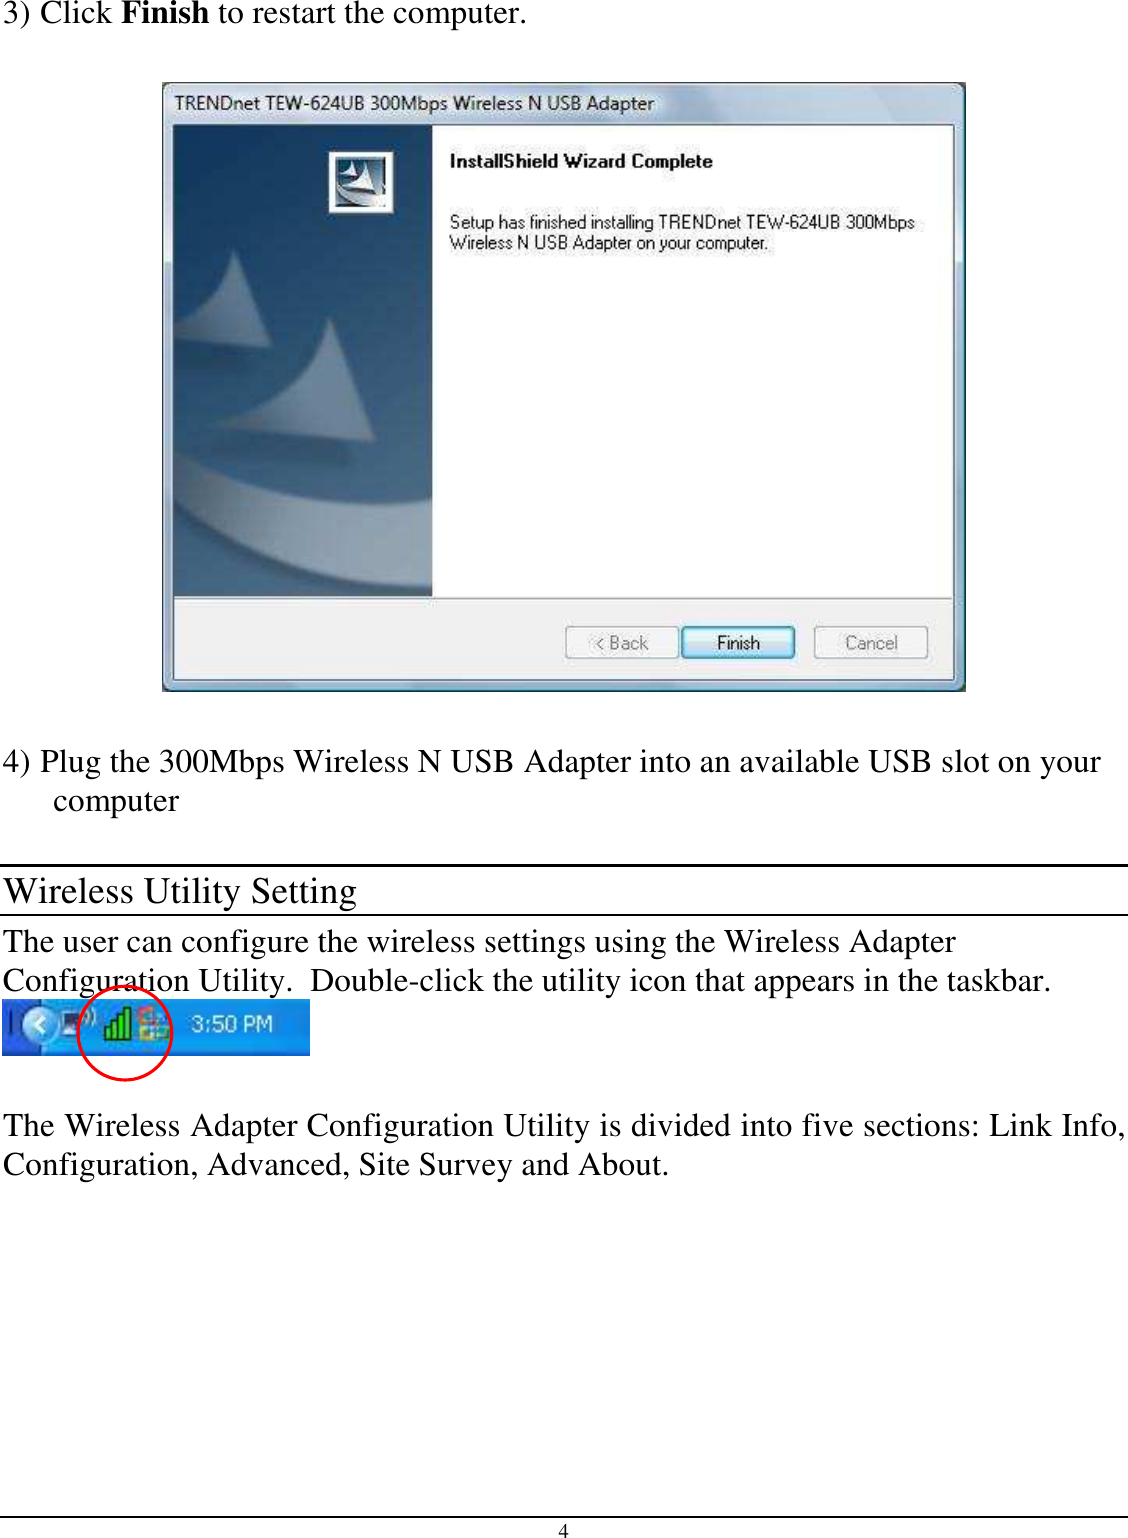 4  3) Click Finish to restart the computer.    4) Plug the 300Mbps Wireless N USB Adapter into an available USB slot on your computer  Wireless Utility Setting The user can configure the wireless settings using the Wireless Adapter Configuration Utility.  Double-click the utility icon that appears in the taskbar.   The Wireless Adapter Configuration Utility is divided into five sections: Link Info, Configuration, Advanced, Site Survey and About.  